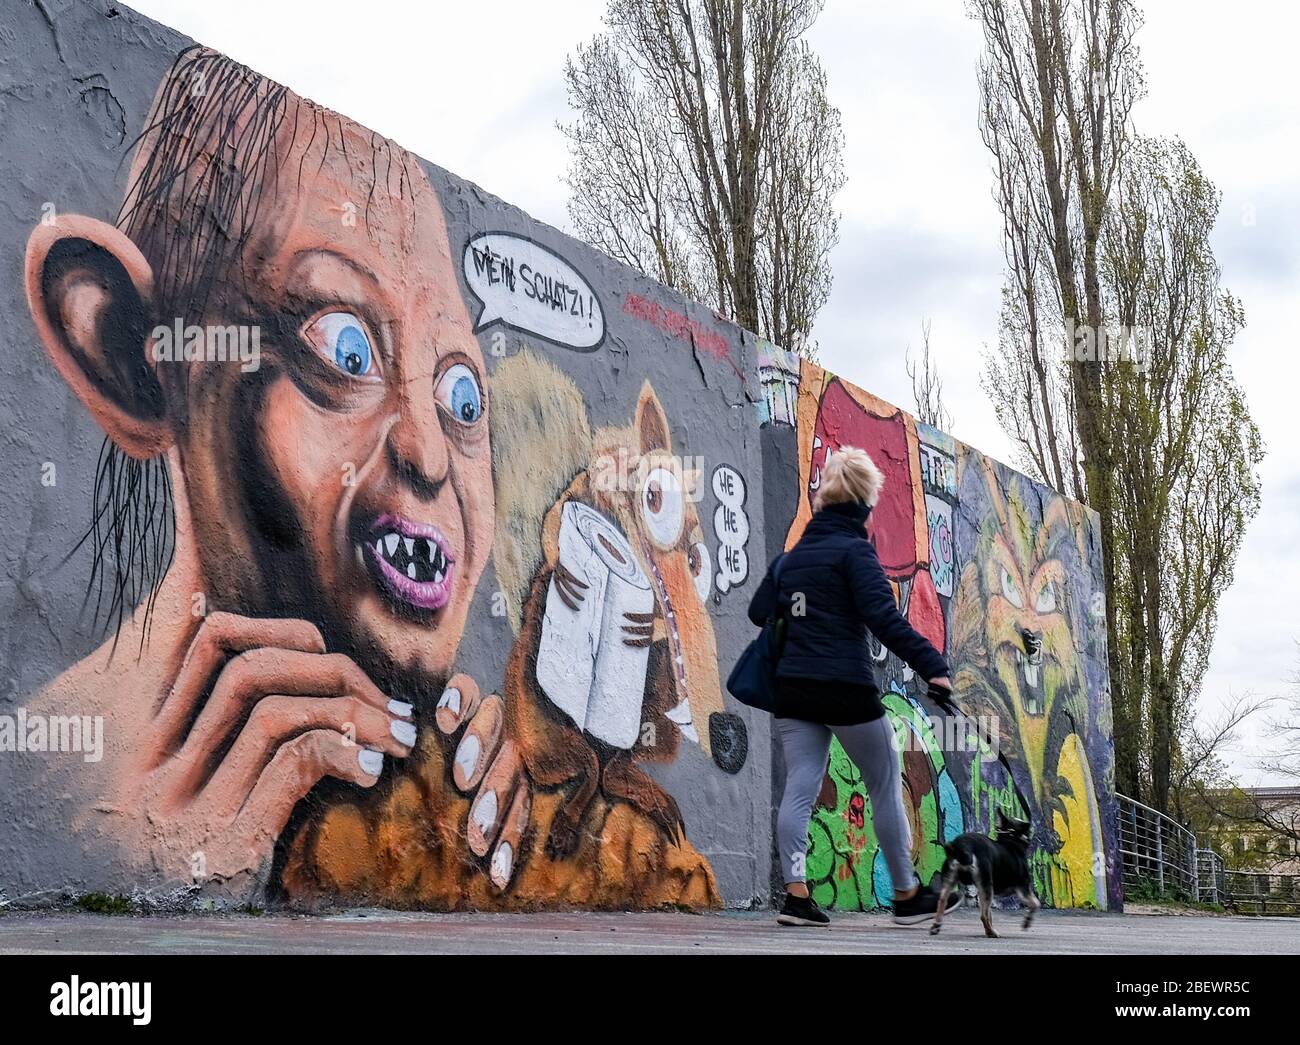 Berlin, Germany. 15th Apr, 2020. A graffito with Gollum, a character from the film 'Lord of the Rings' and Scrat, a sabre-toothed squirrel from the film 'Ice Age', can be seen on a wall in Mauerpark with a roll of toilet paper. During the Corona Crisis, there are ongoing hamster purchases of toilet paper in Germany. Credit: Jens Kalaene/dpa-Zentralbild/ZB/dpa/Alamy Live News Stock Photo